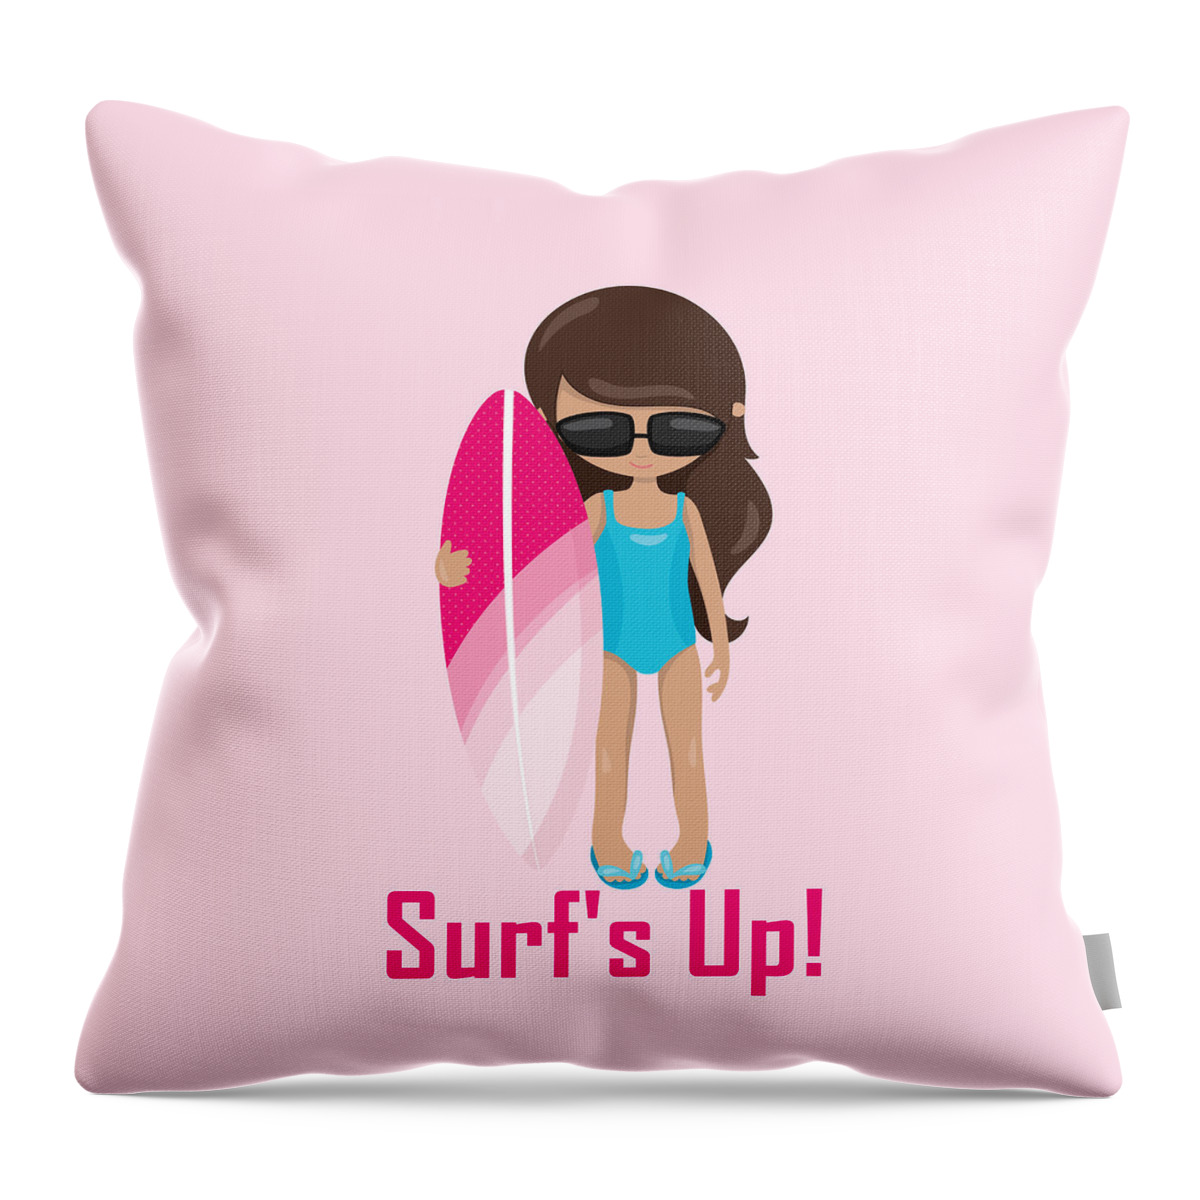 Surfer Art Throw Pillow featuring the digital art Surfer Art Surf's Up Girl With Surfboard #18 by KayeCee Spain